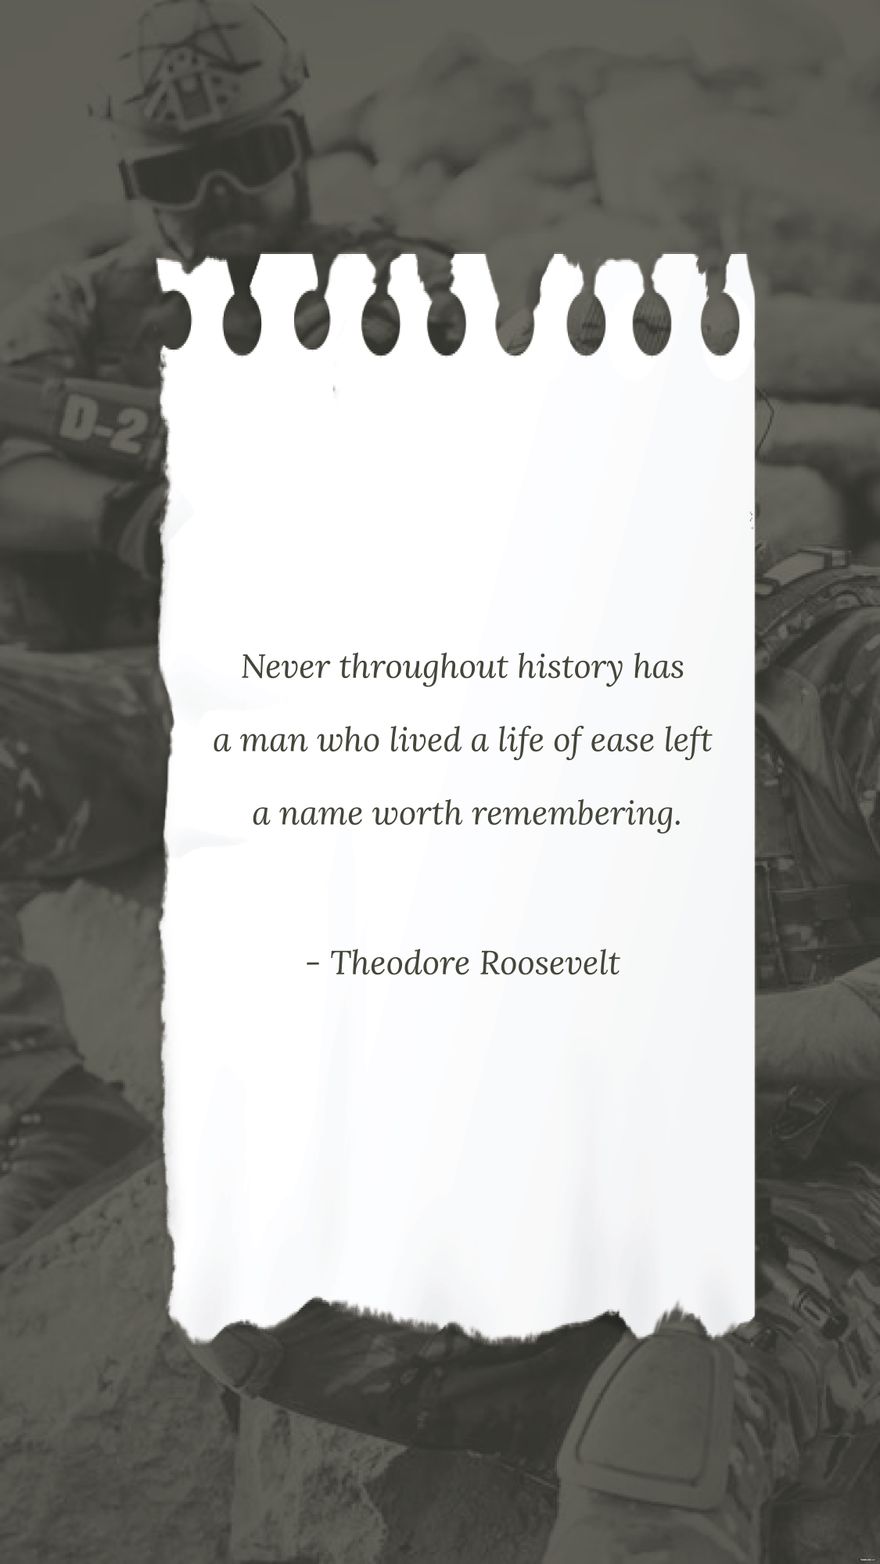 Theodore Roosevelt - Never throughout history has a man who lived a life of ease left a name worth remembering.